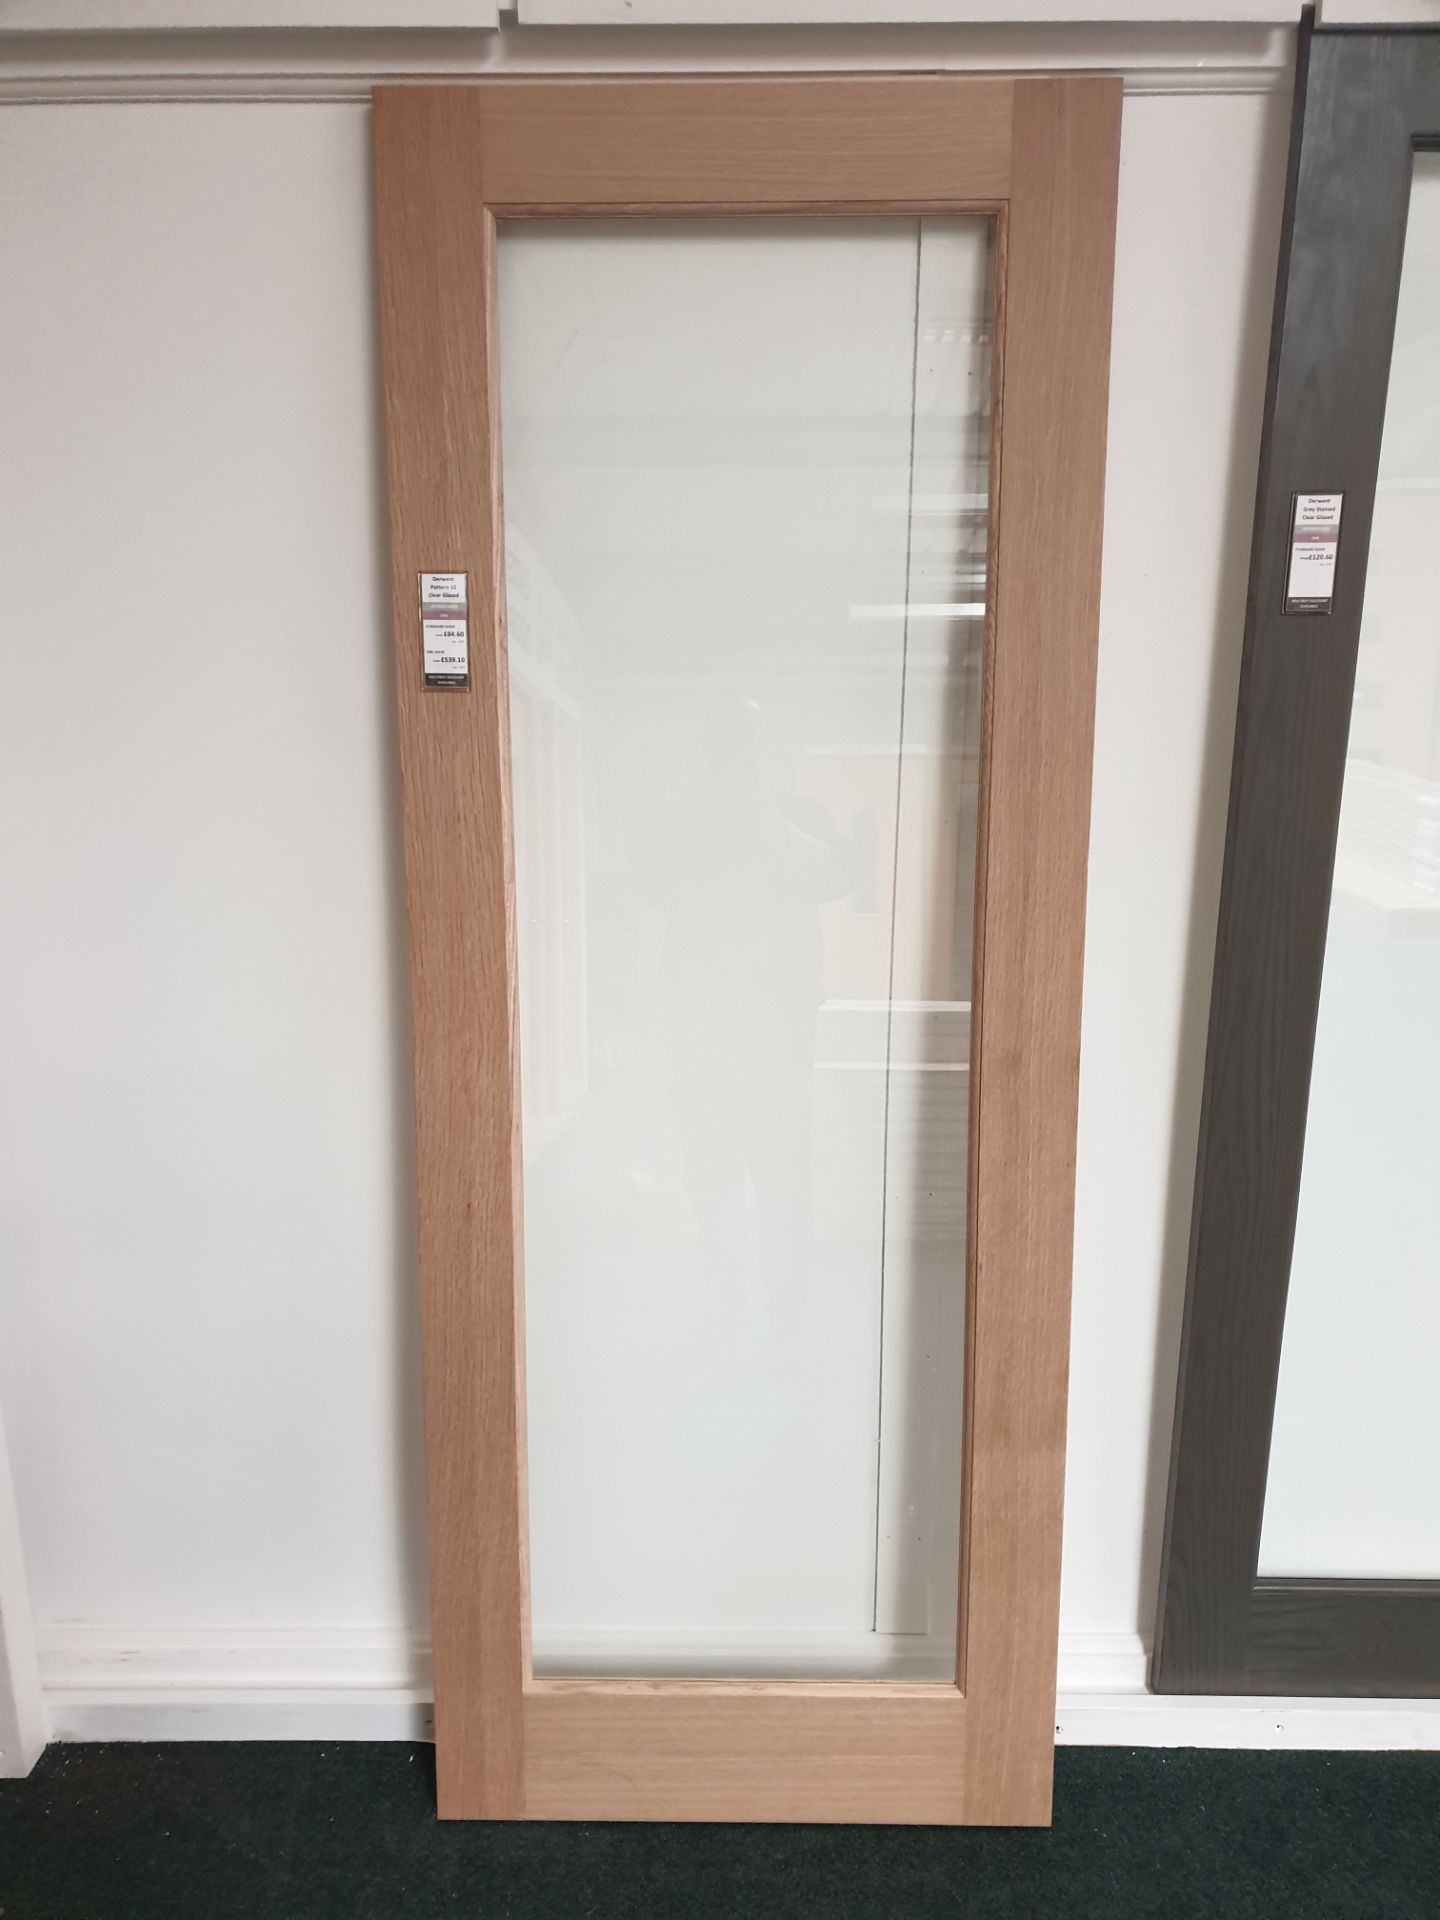 9 x Derwent Clear Glazed AWODERWENT12 78”x12”x35mm Internal Door - Lots to be handed out in order